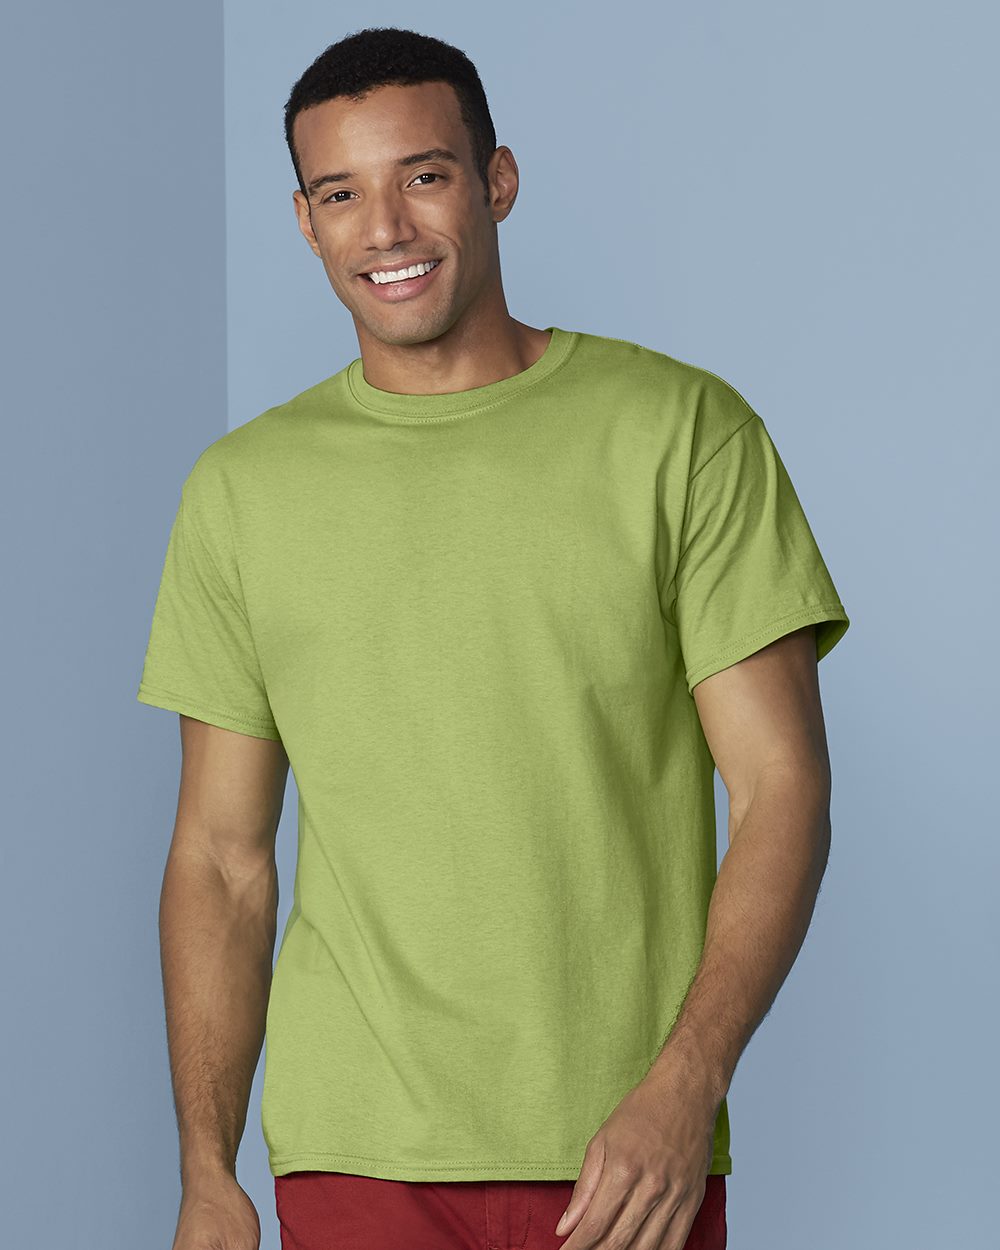 Gildan blank Ultra Cotton T Shirt multiple colors and sizes S M L